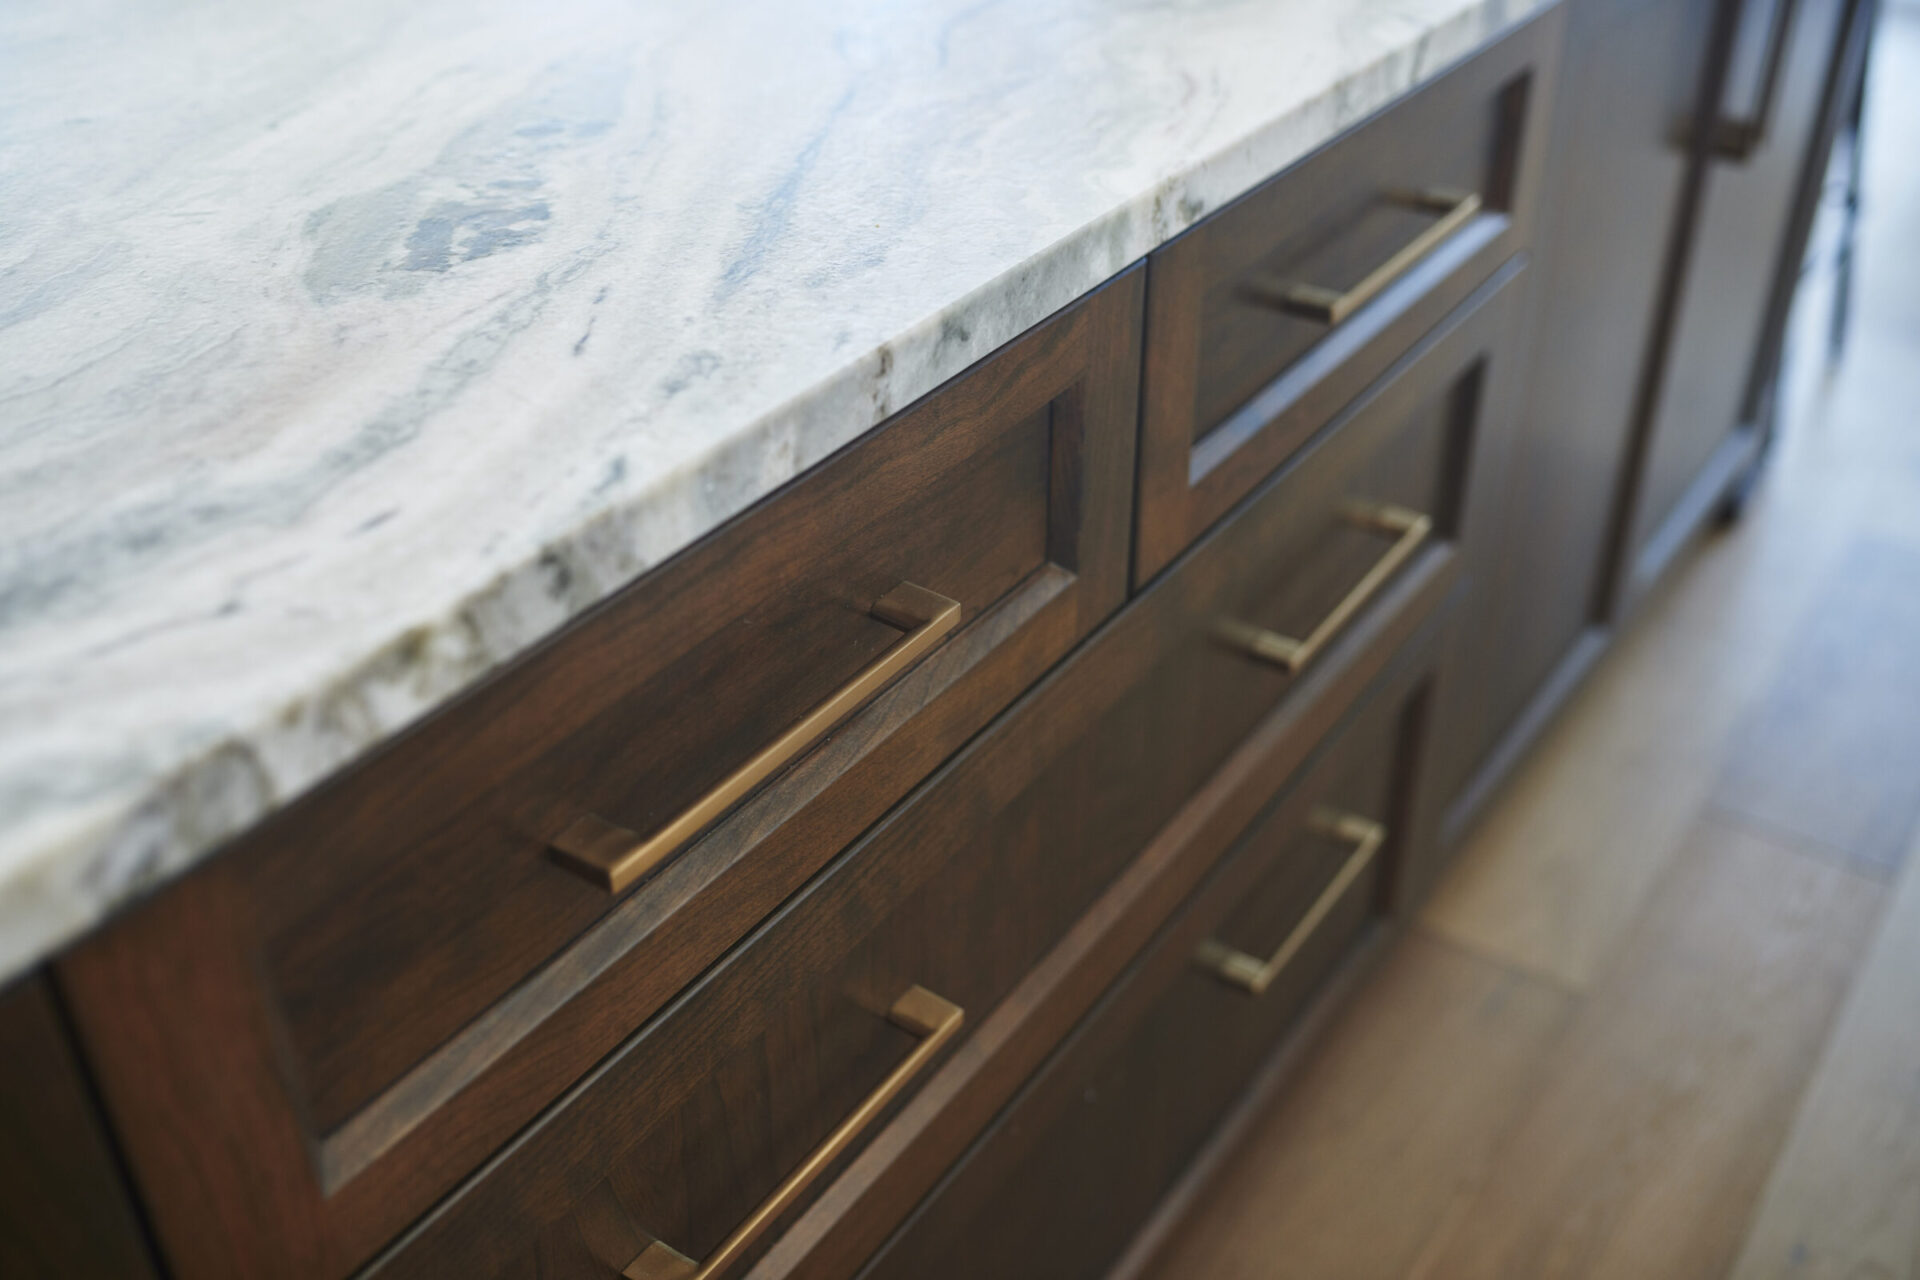 Close-up of a kitchen counter with a marble top and wooden cabinets featuring brass handles, in a modern interior with a shallow depth of field.